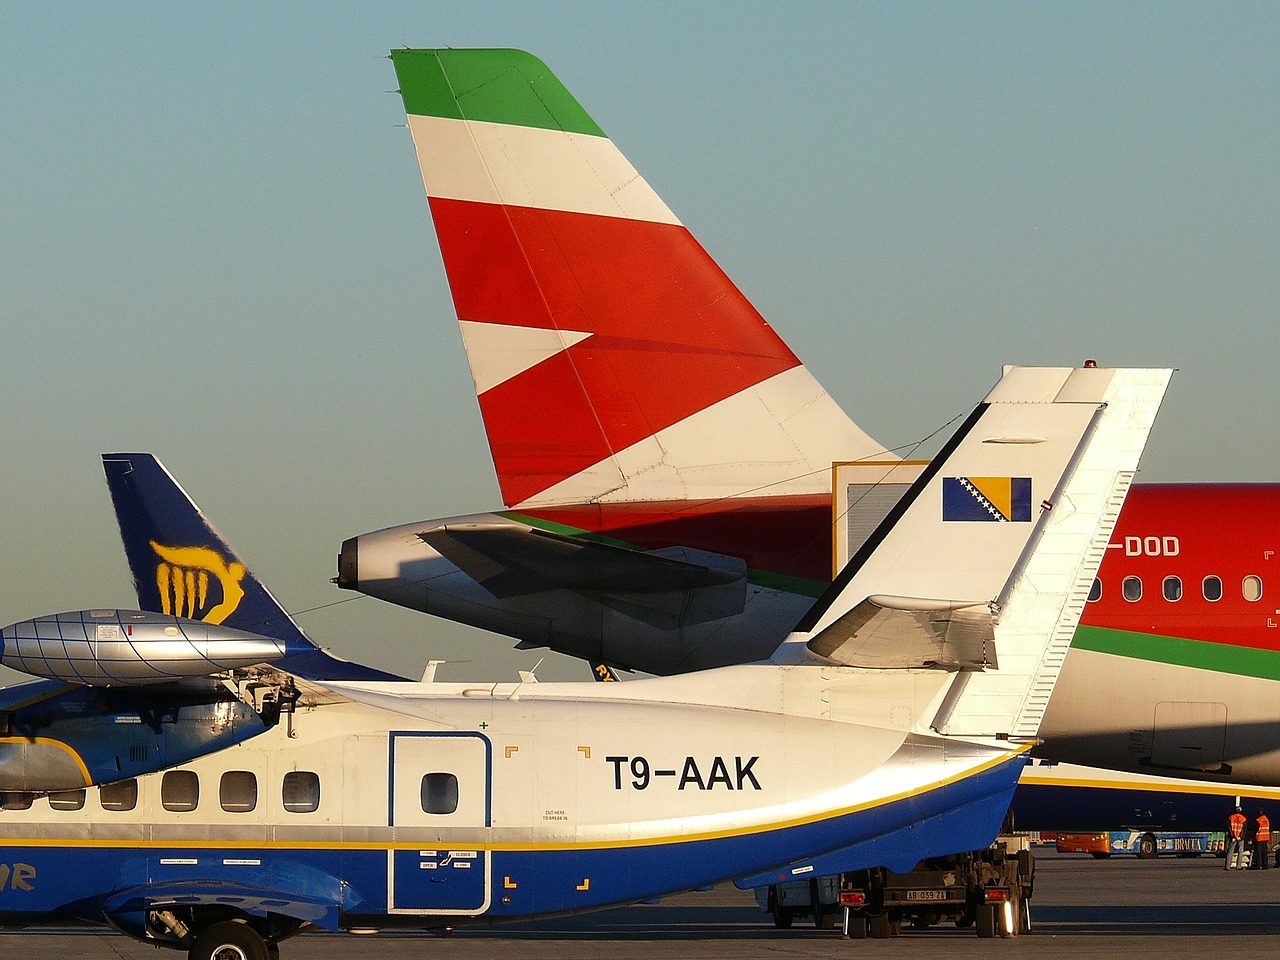 Air-transport strike sees 250000 people affected. Image shows tails of three aeroplanes